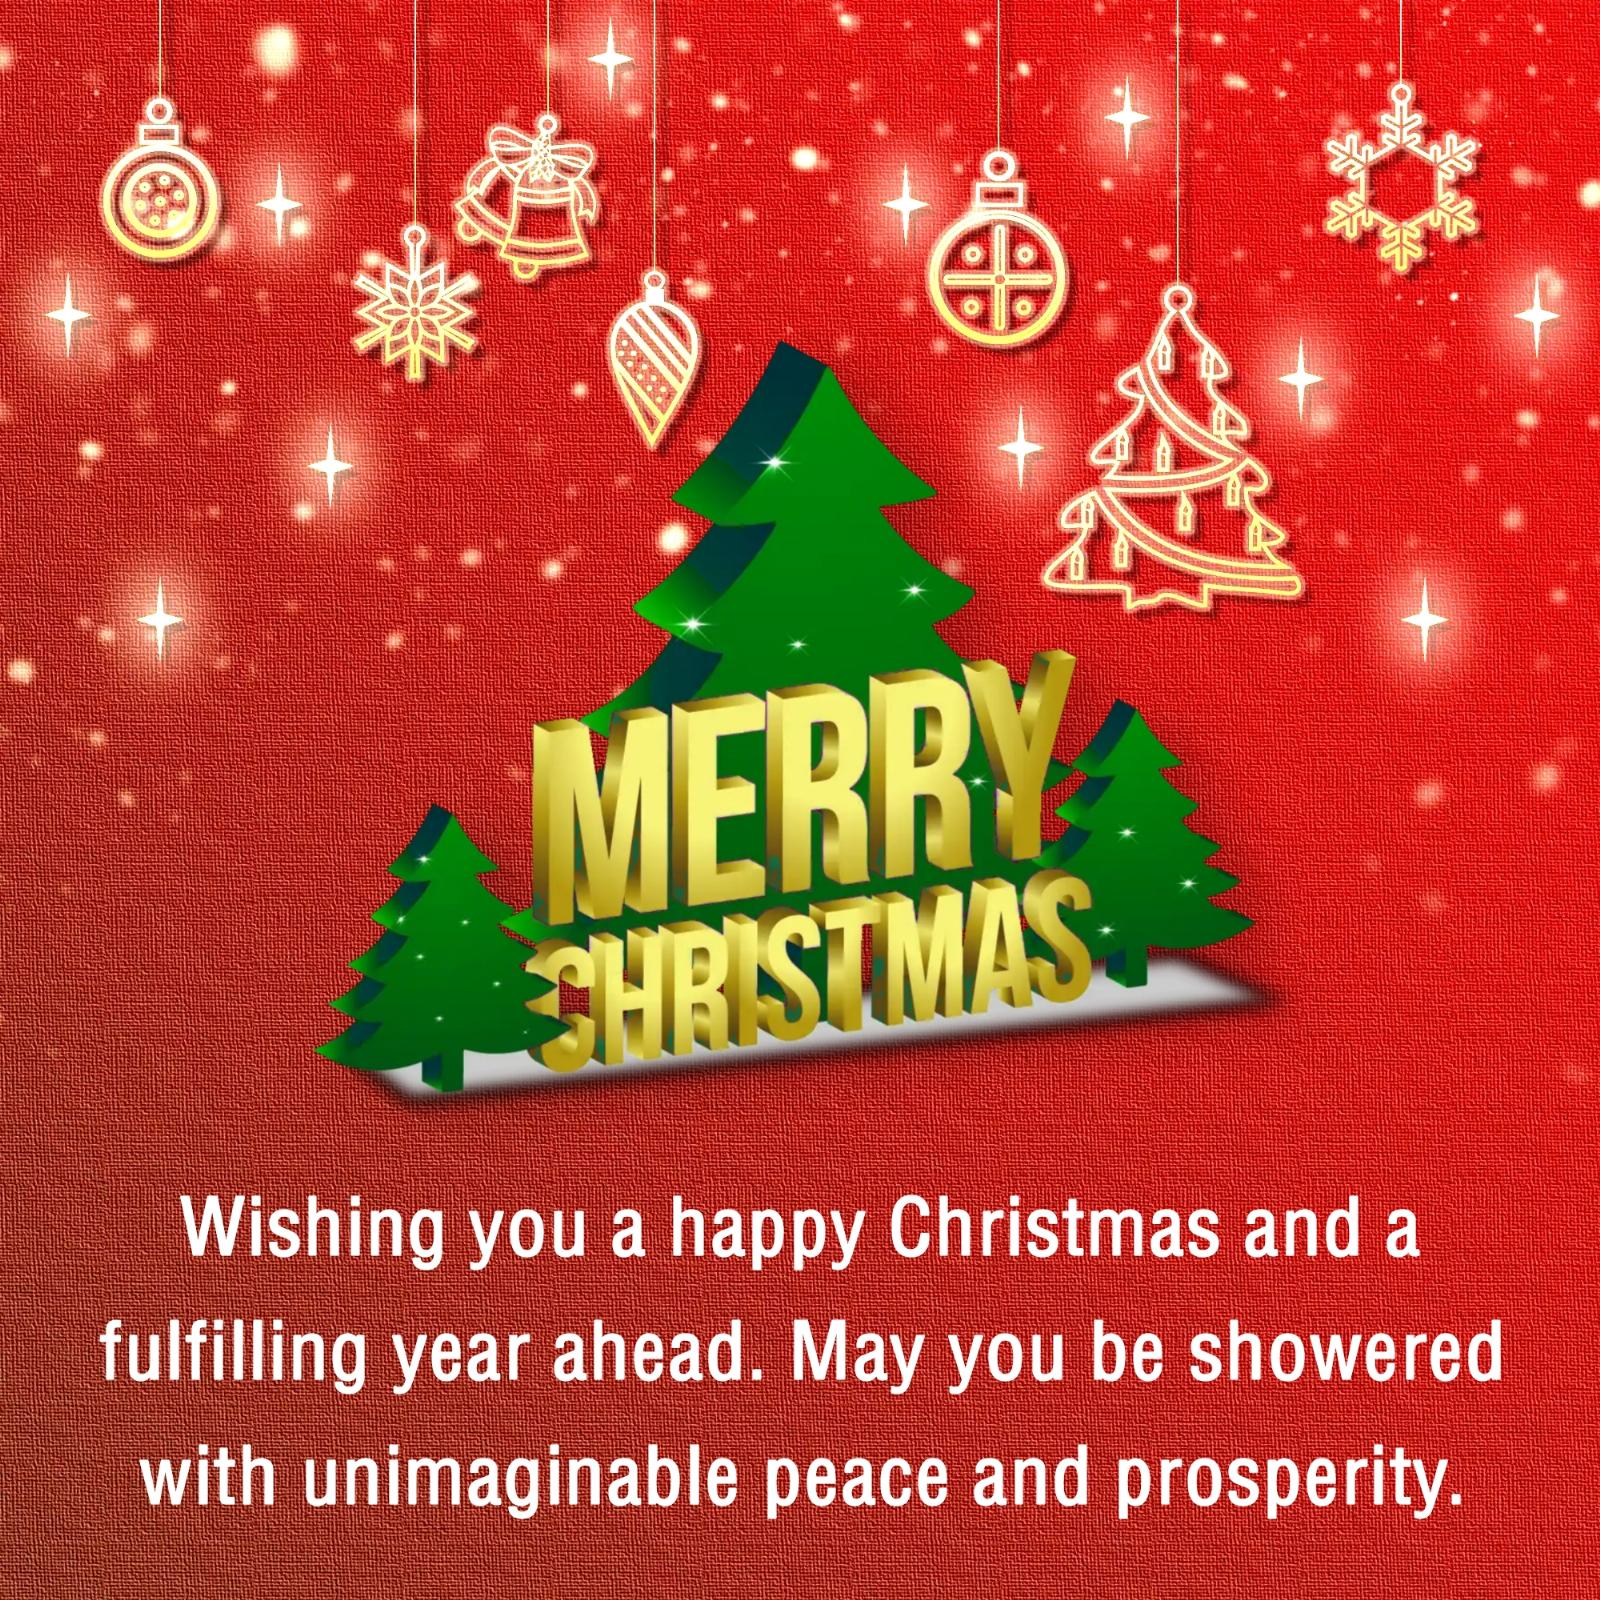 Wishing you a happy Christmas and a fulfilling year ahead